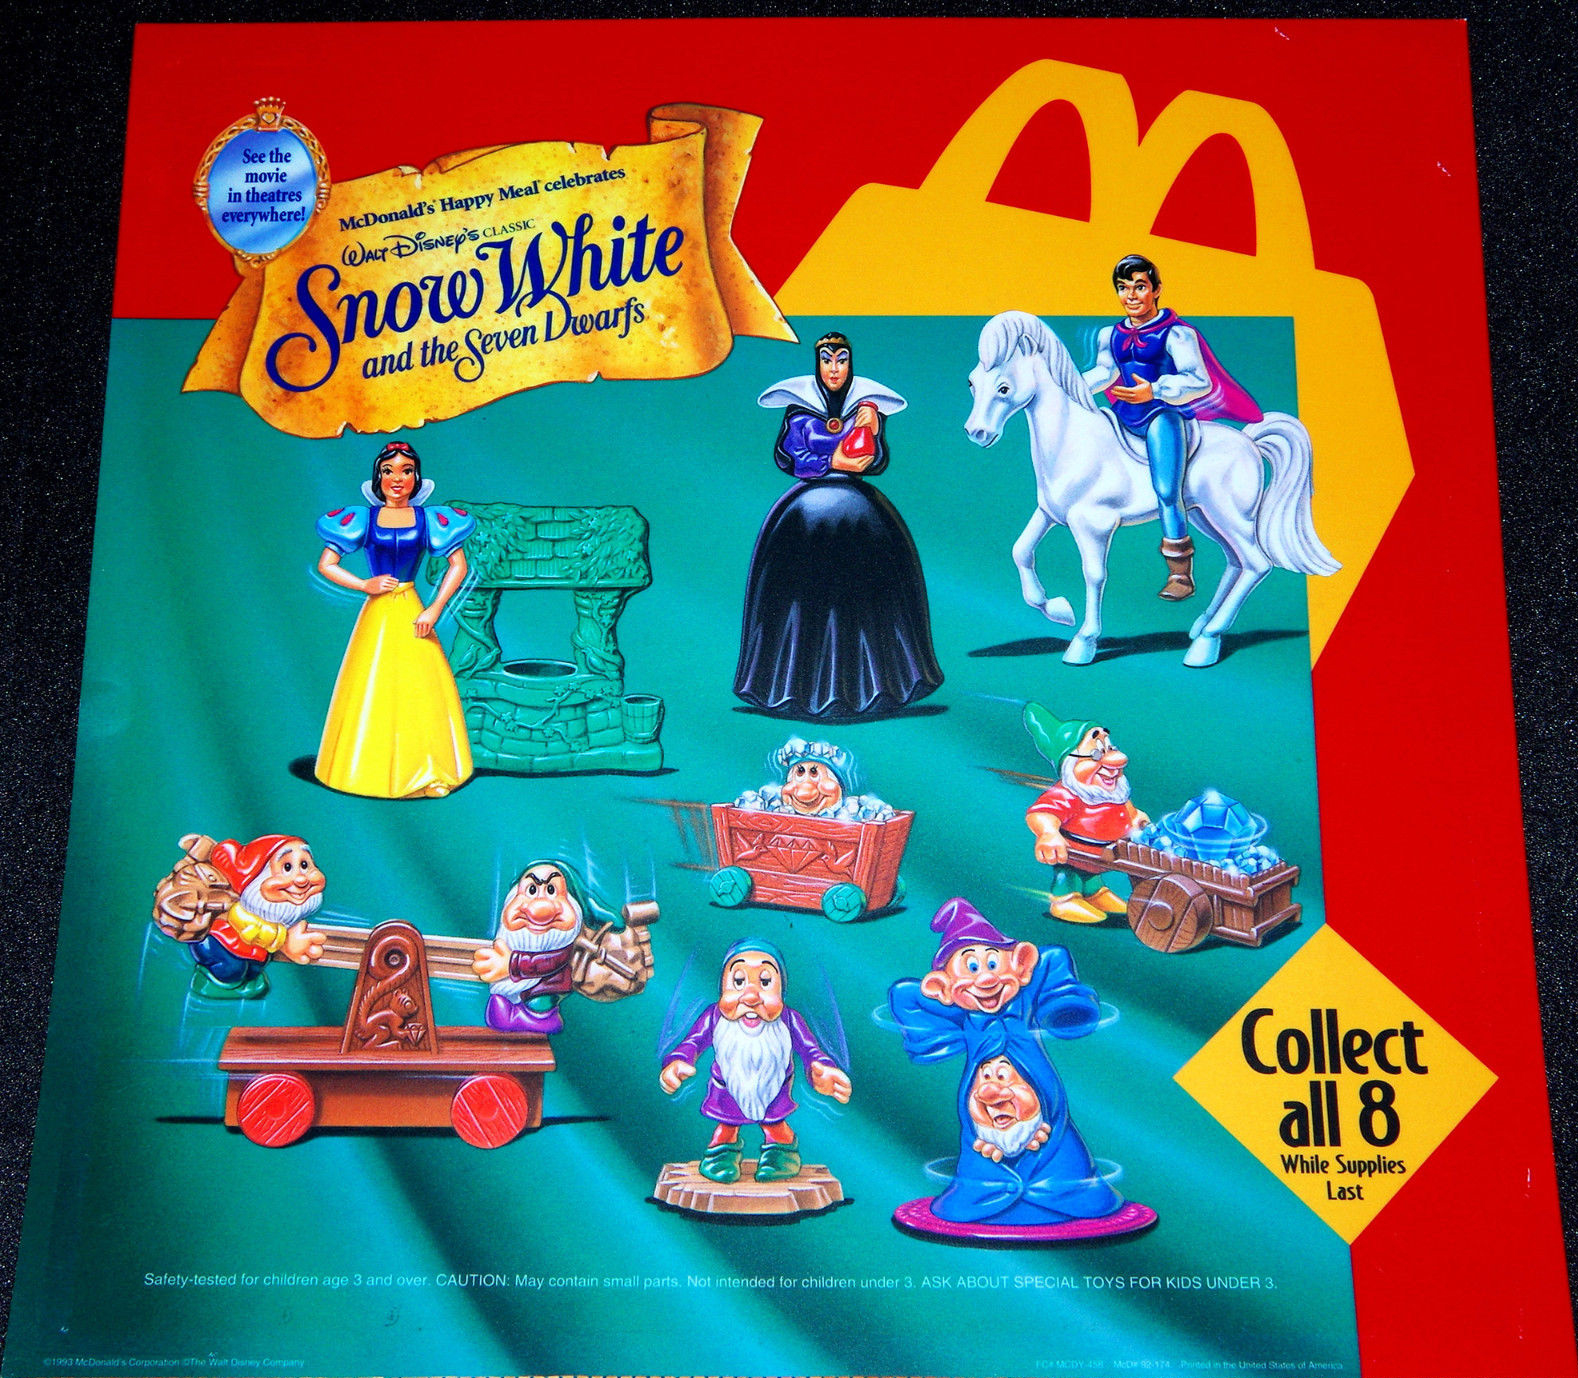 Details about   Walt Disney’s McDonald’s Happy Meal Toy 1995 SNOW WHITE AND THE SEVEN DWARFS 